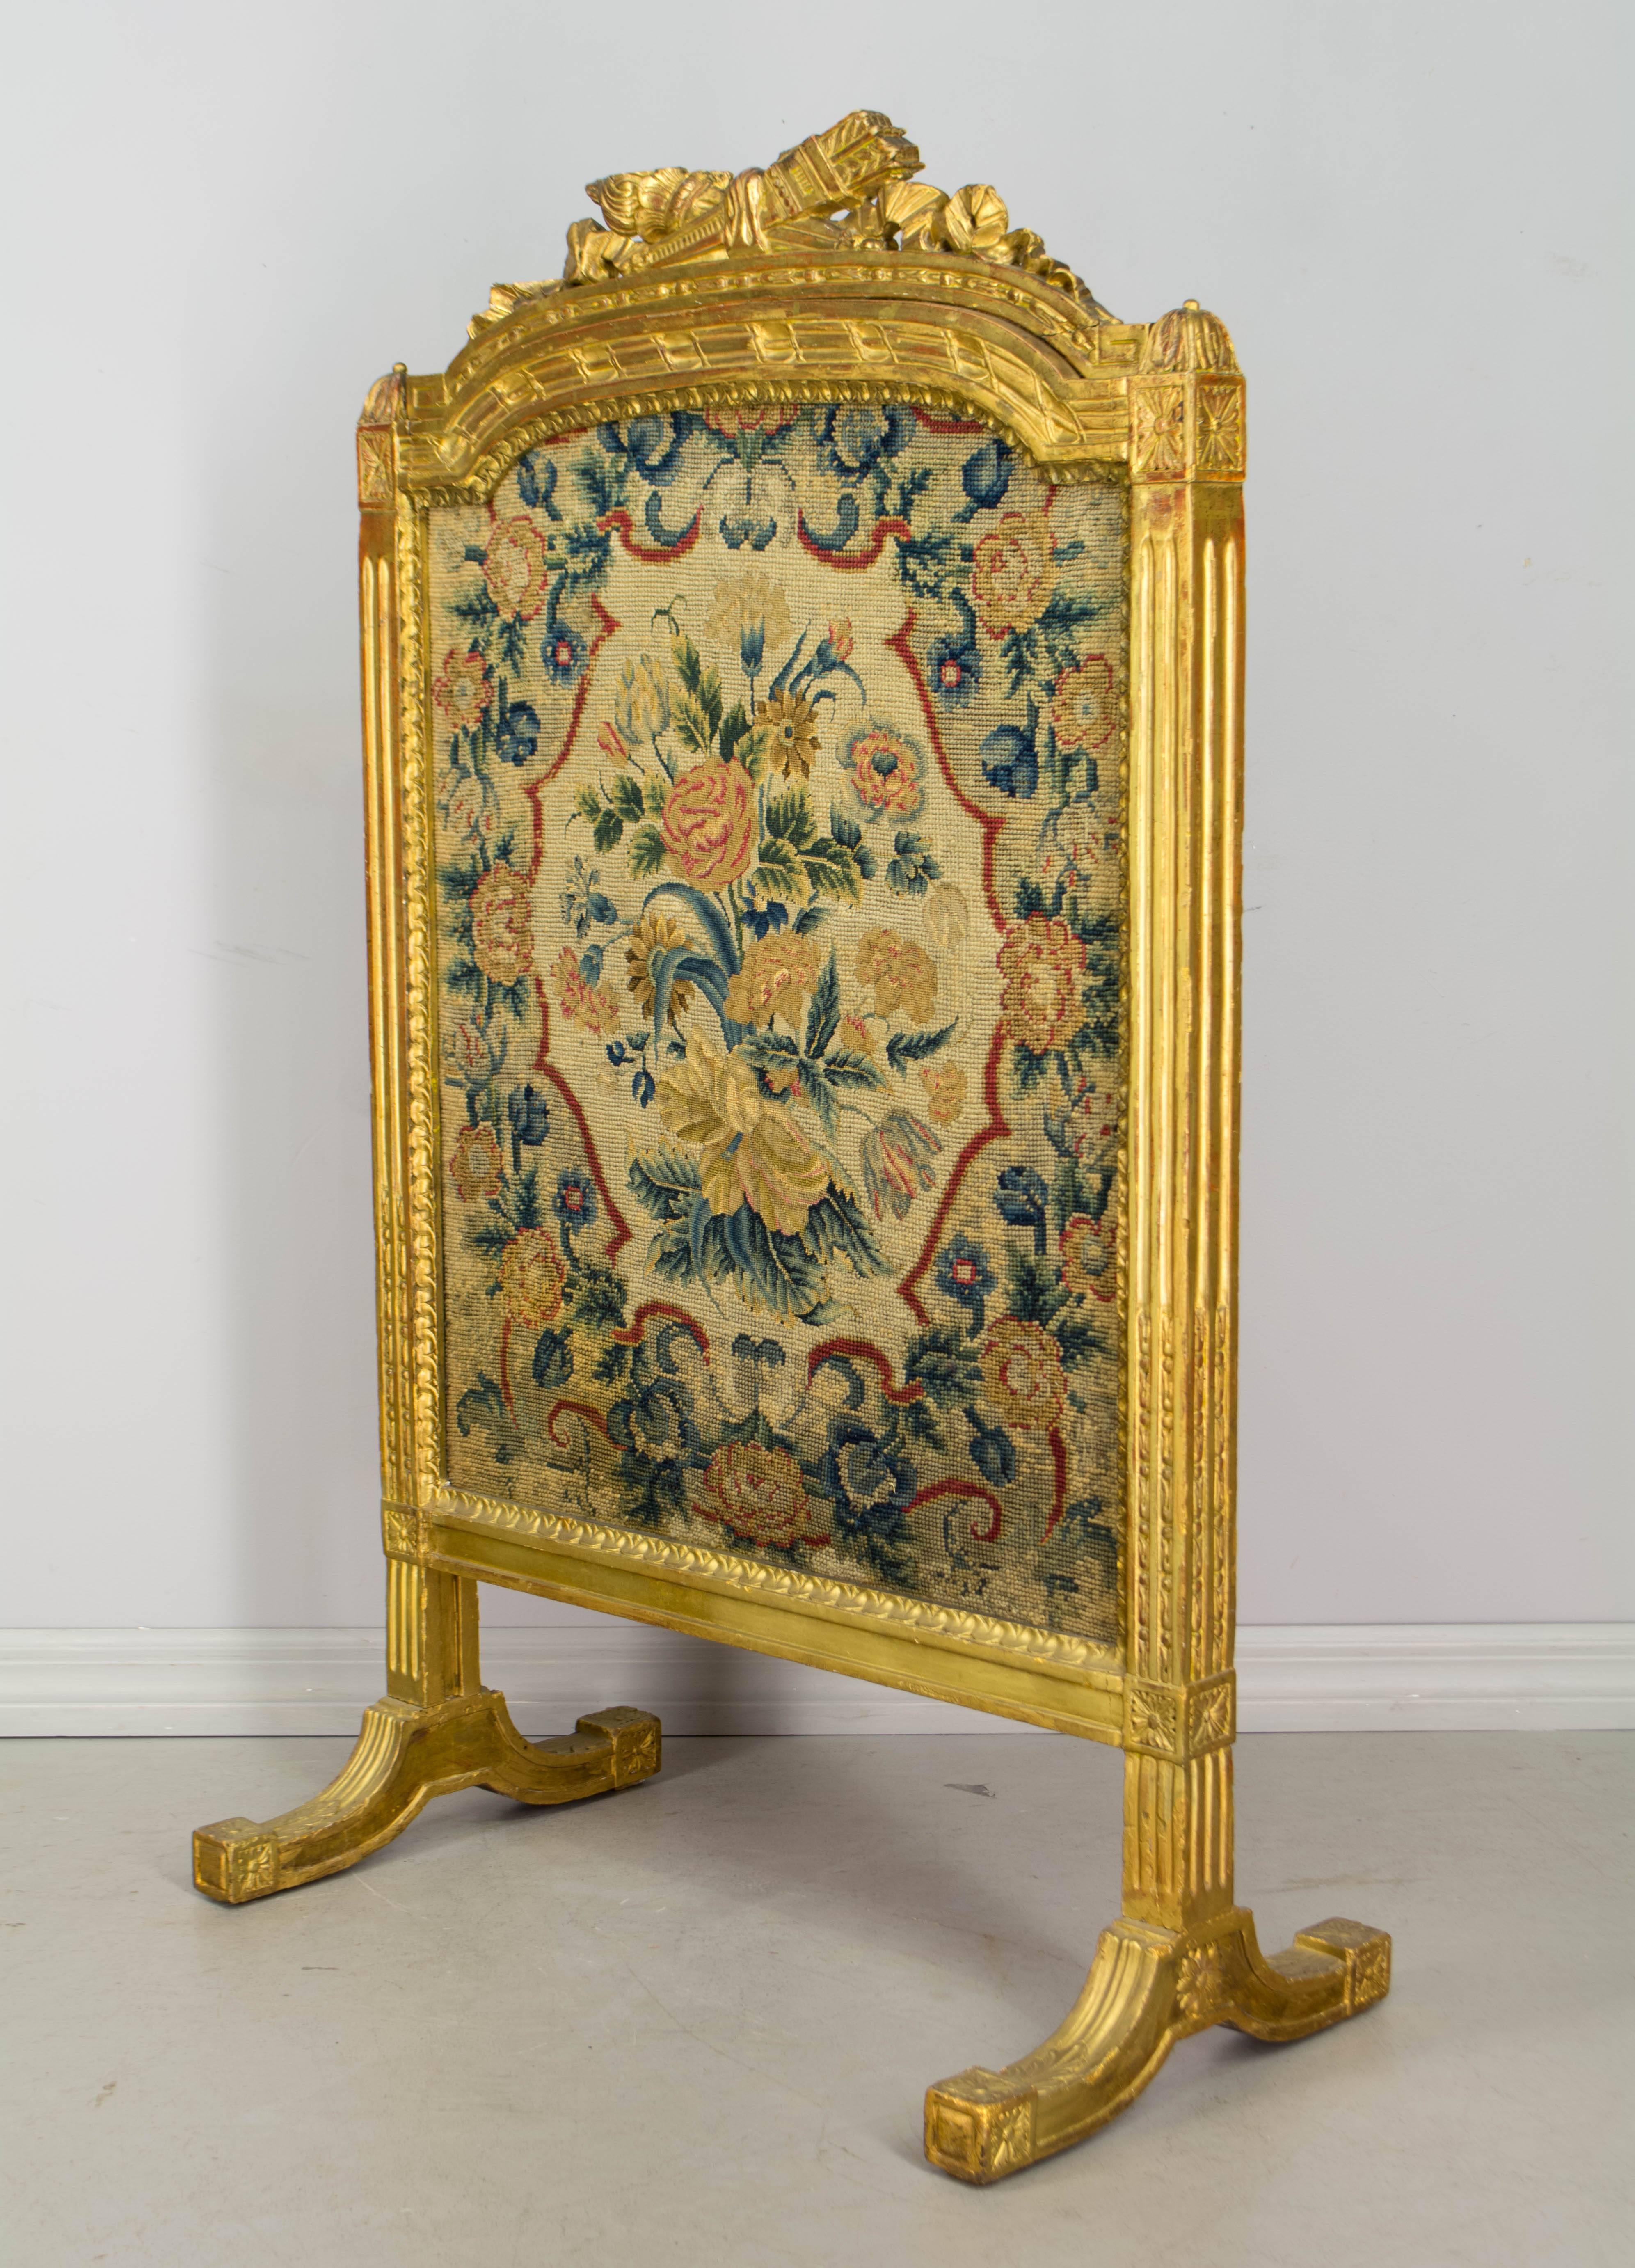 19th century Louis XVI style fire screen with carved and gilded wood frame and petit-point tapestry. Gilt is nice and bright, with some restoration and touch-ups throughout. Beautiful floral tapestry is in excellent condition with vivid color.